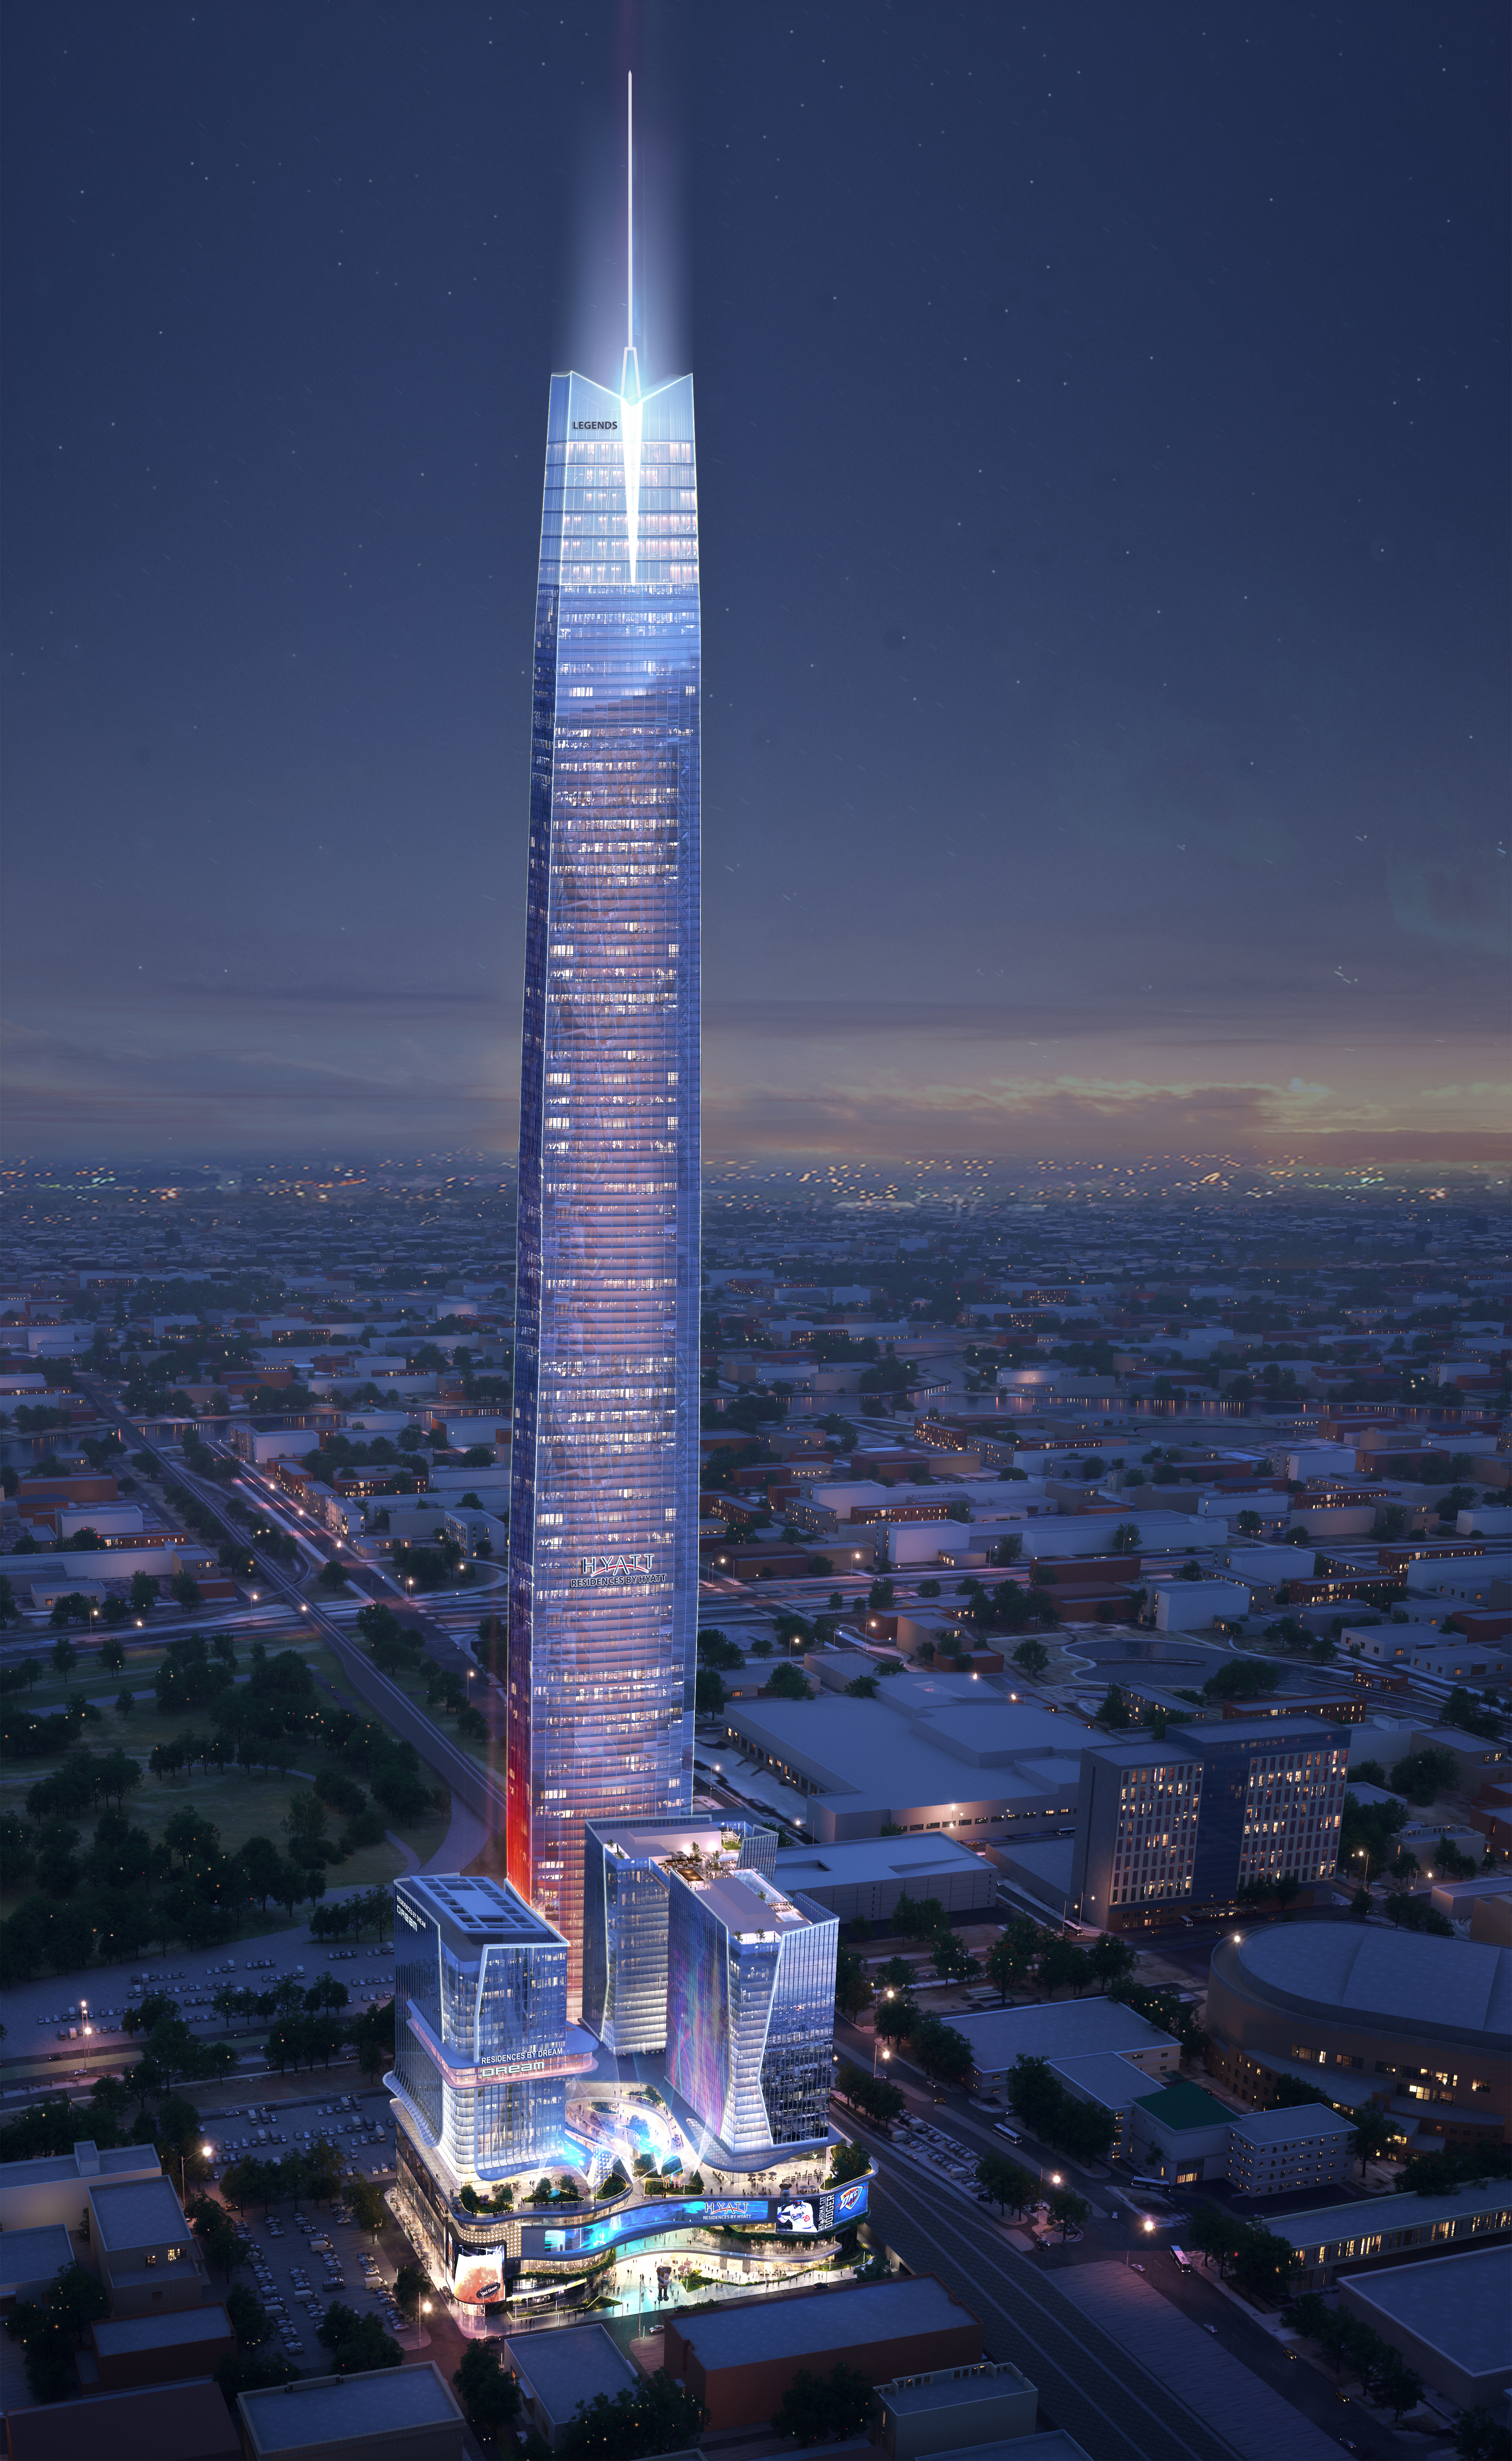 Boardwalk2520at2520Bricktown2520Revised2520image Matteson Capital and AO Partner to Build Tallest Building in U.S